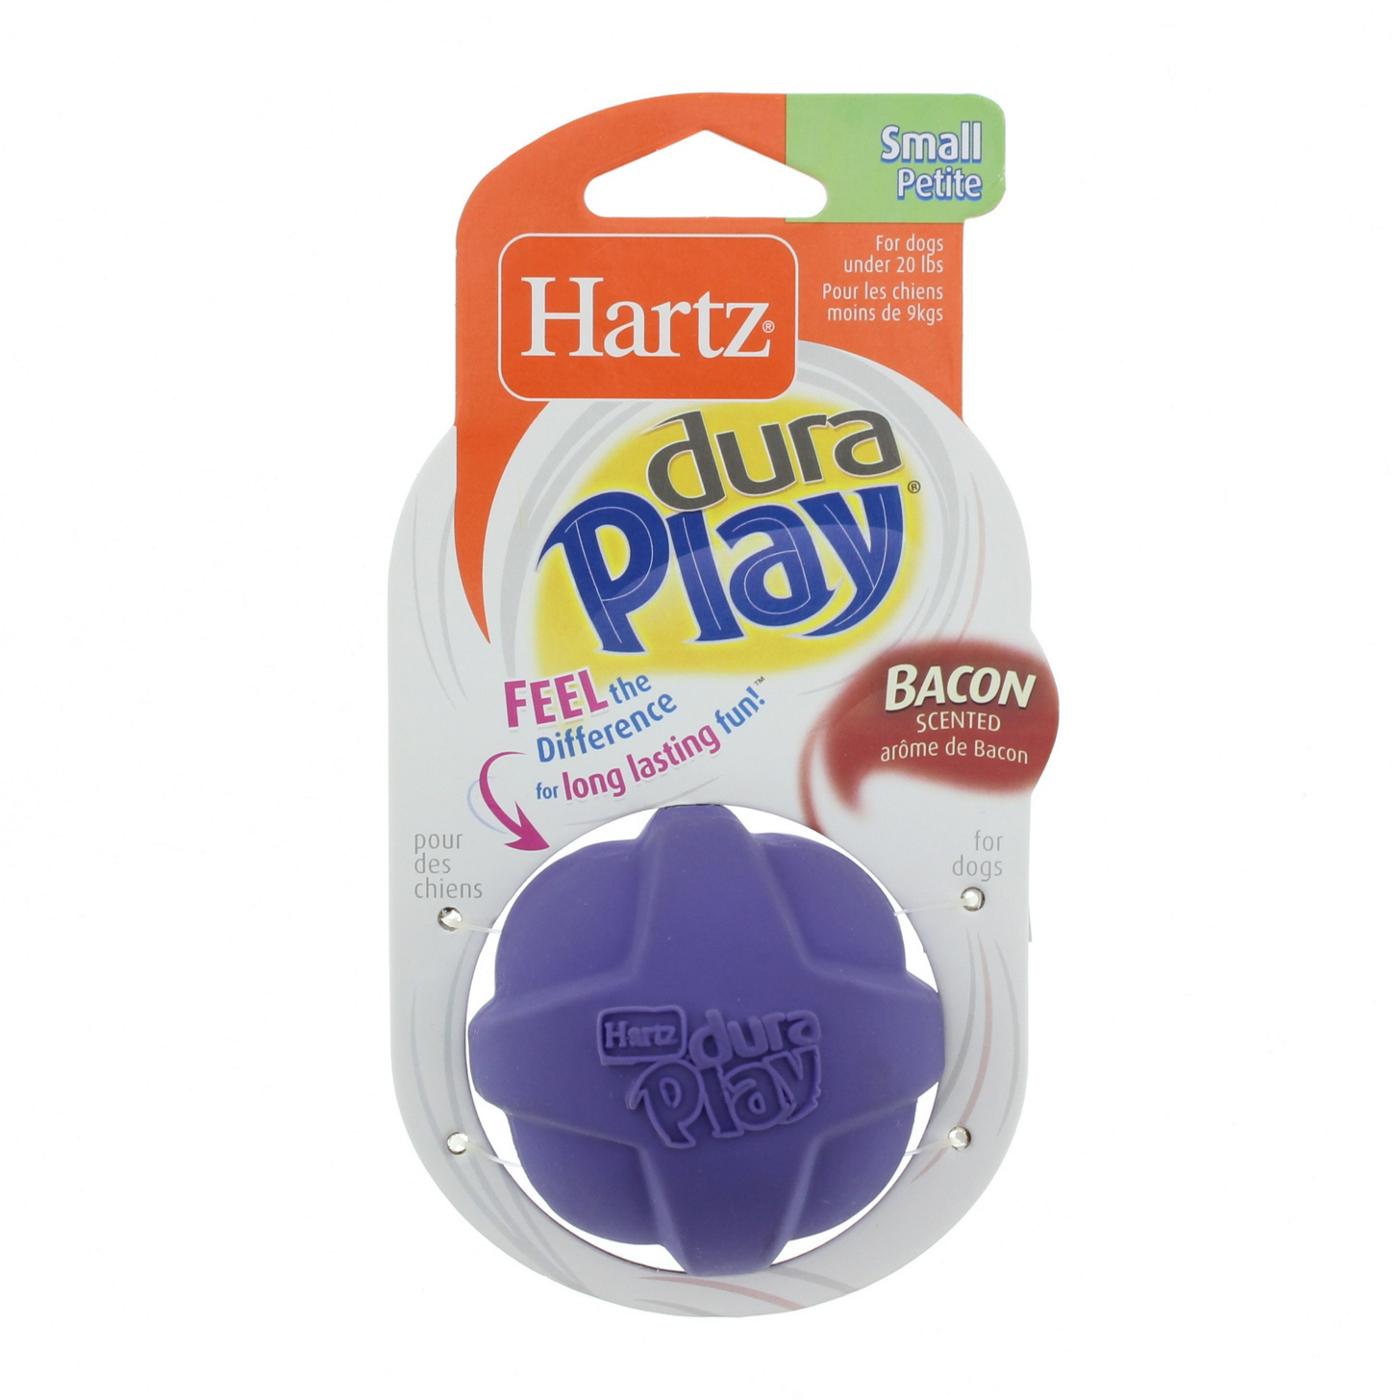 Hartz Dura Play Small Ball Latex Dog Toy, Assorted Colors; image 1 of 2